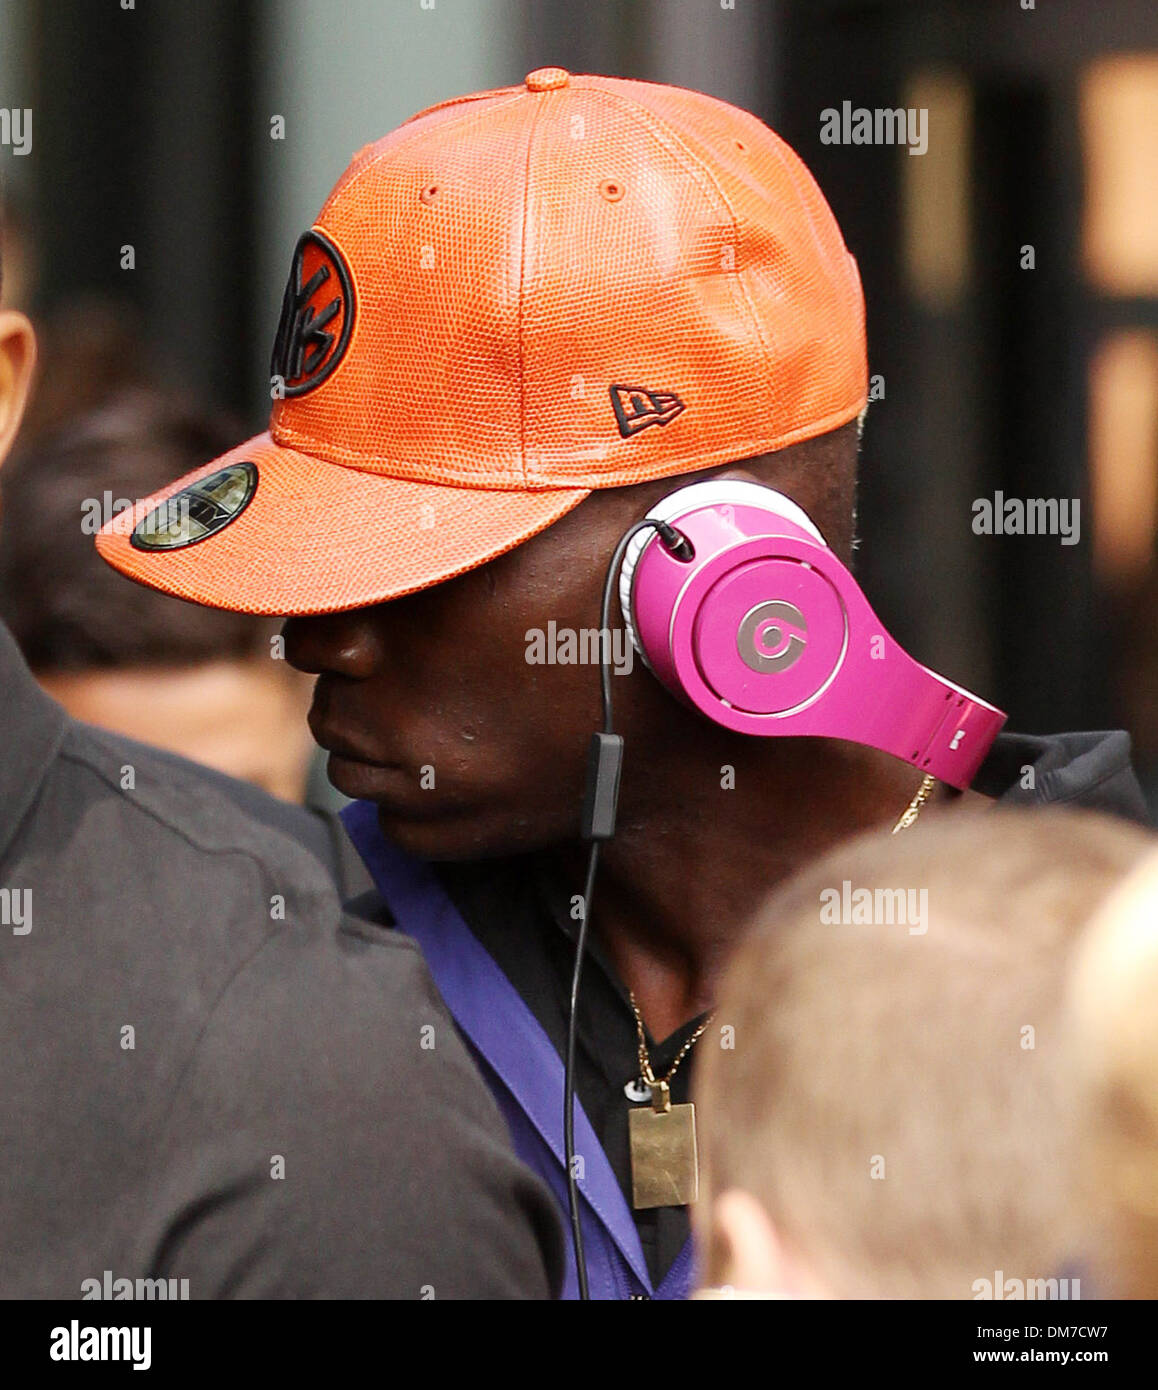 Mario Balotelli leaving a hotel in Liverpool wearing pink Beats By Dre  headphones and a bright orange baseball cap Liverpool Stock Photo - Alamy